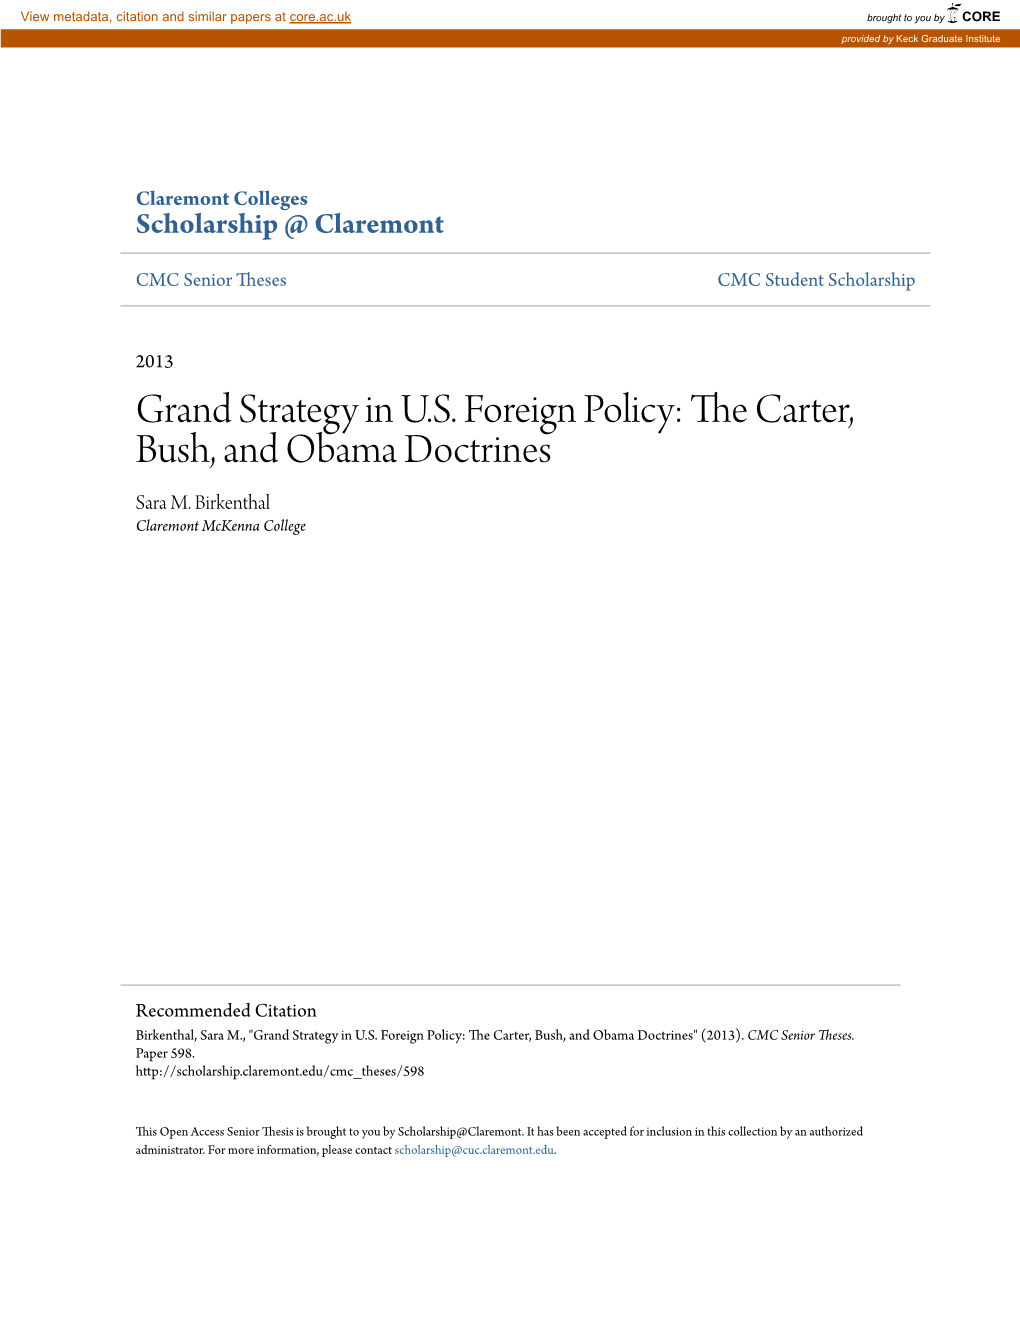 Grand Strategy in U.S. Foreign Policy: the Carter, Bush, and Obama Doctrines